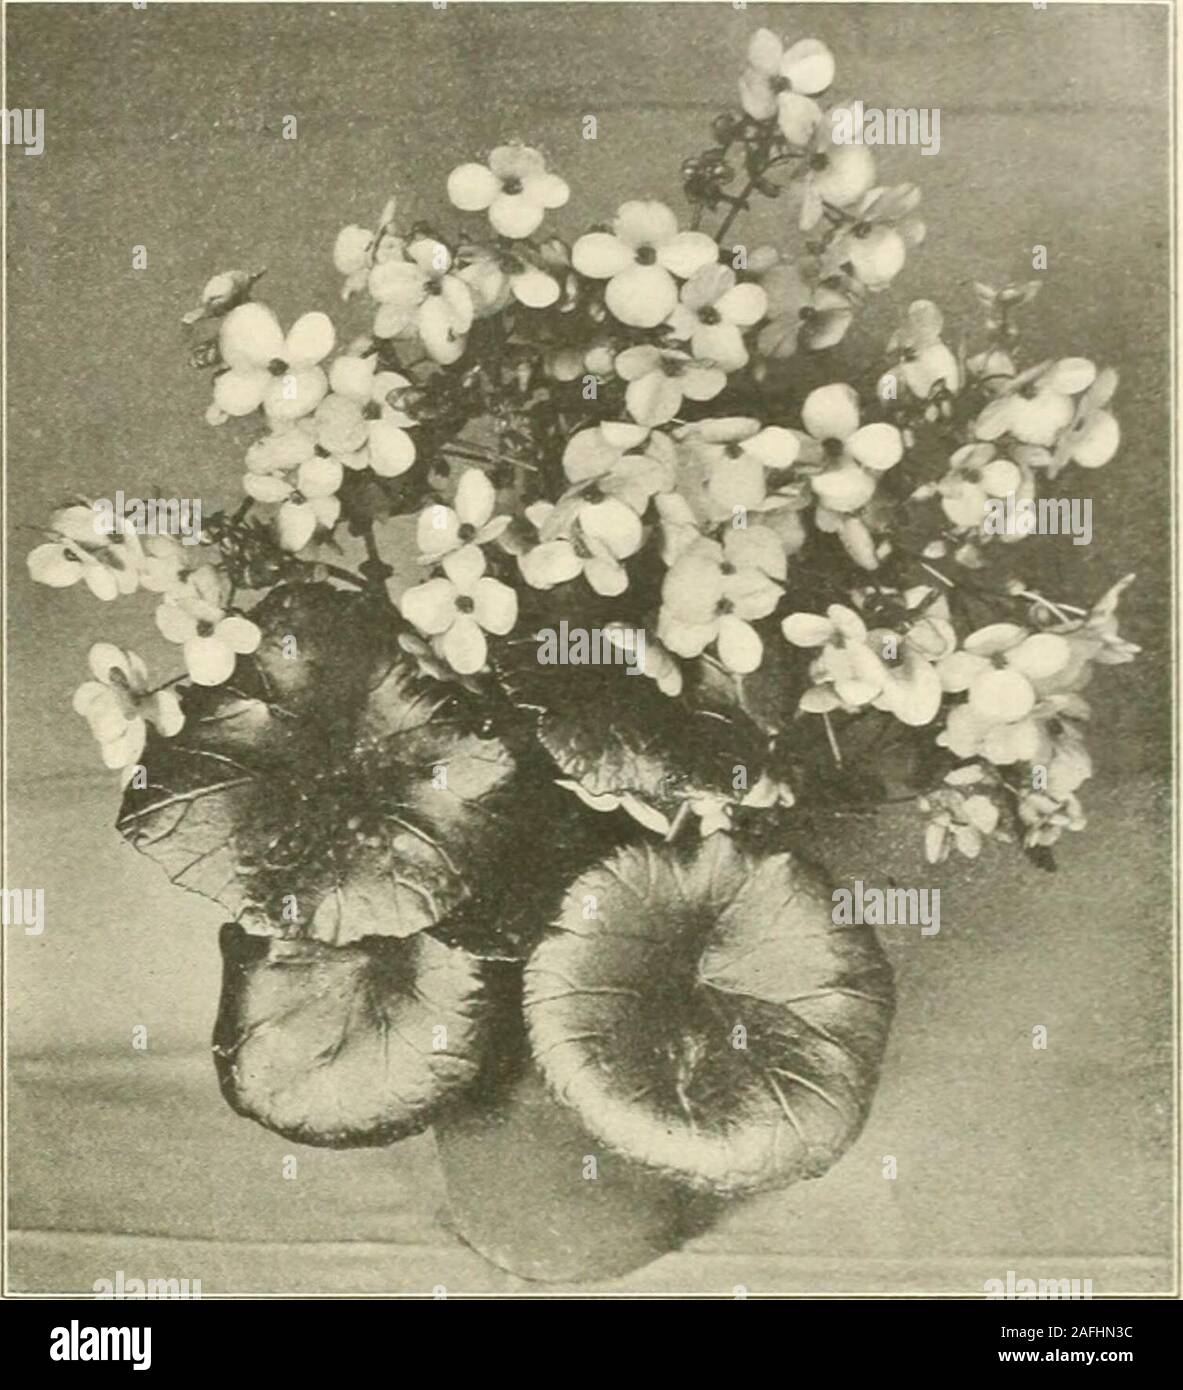 . Farquhar's autumn catalogue : 1913. Buddleia Asiatica. Begonia, Gloire de Lorraine. BEGONIA. Gloire de Lorraine. Of all the winter-blooming plants this variety is themost lavish in its production of flowers. The flowers are of a brightsahnon-rose color growing in large, gracefully drooping panicles. Plantsfrom 2j in. pots, S2.50 per doz.; S15.00 per 100; 3I in. pots, S4-oo perdoz. S30.00 per 100; 6 in. pans, each Si.oo; Sic-oo per doz. Glory of Cincinnati. A more vigorous type of the Lorraine. Plants from2J in. pots, S3.00 per doz.; S20.00 per 100; 35 in. pots, S5.00 per doz.;S35.00 per 100; Stock Photo